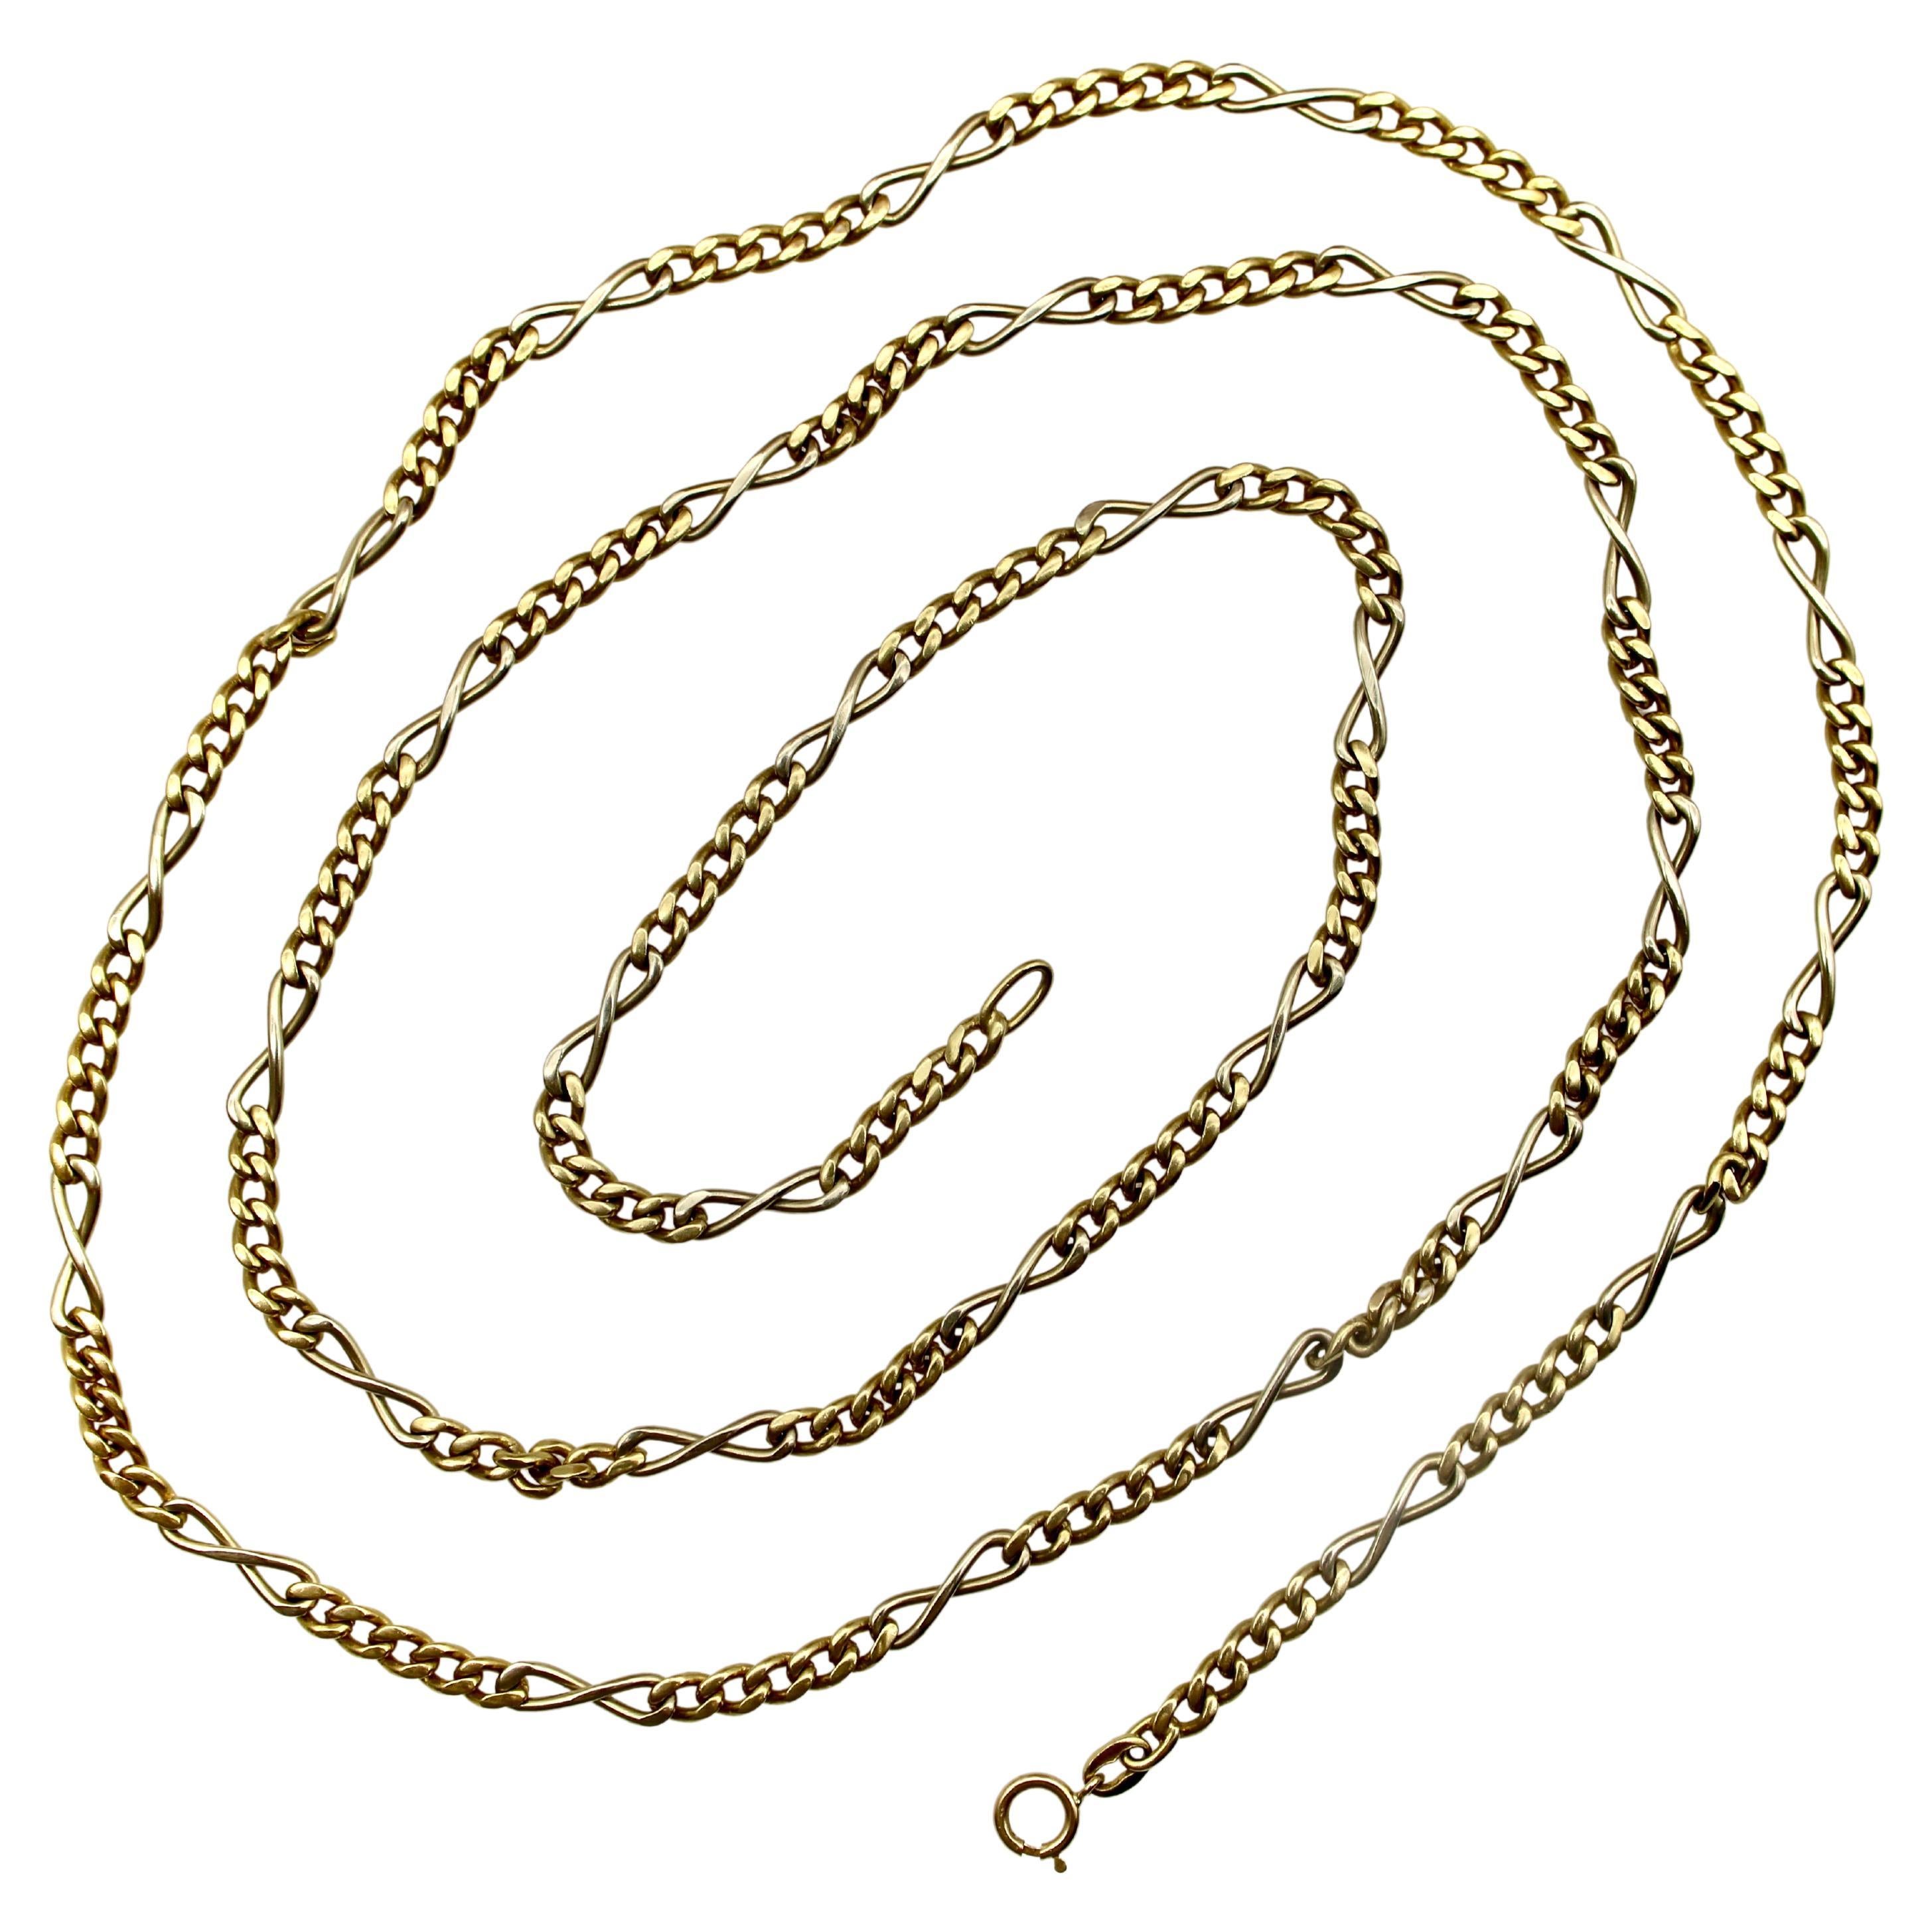 1stDibs 18K Gold Vintage Curb Infinity Link Chain Contemporary